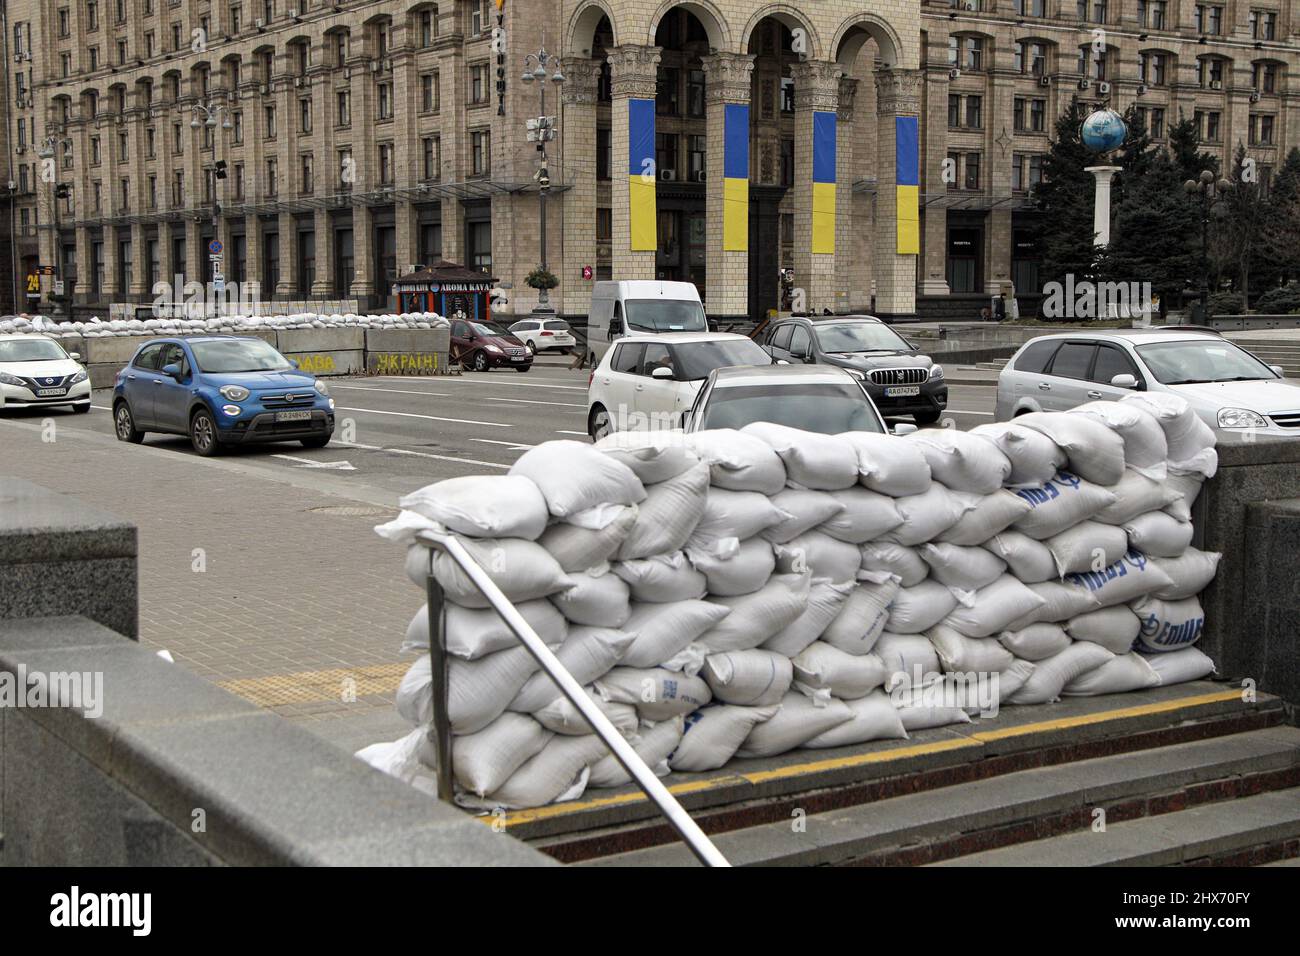 Non Exclusive: KYIV, UKRAINE - MARCH 09, 2022 - Entrance to an underpass is lined with sandbags, Kyiv, capital of Ukraine Stock Photo